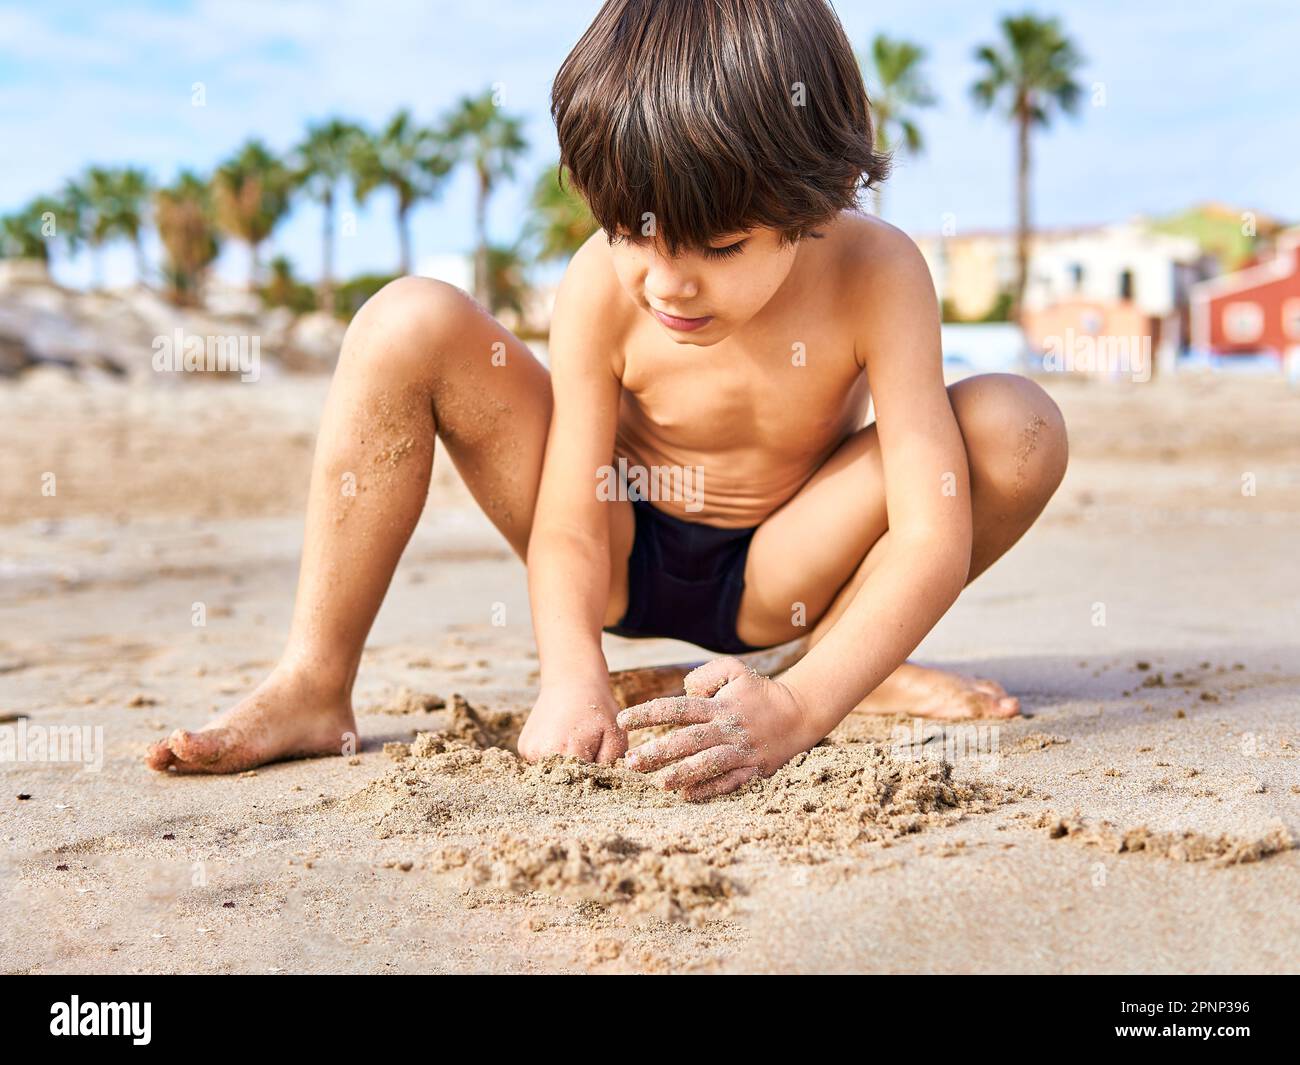 elementary age kid playing on the beach sand with palmtrees background Stock Photo